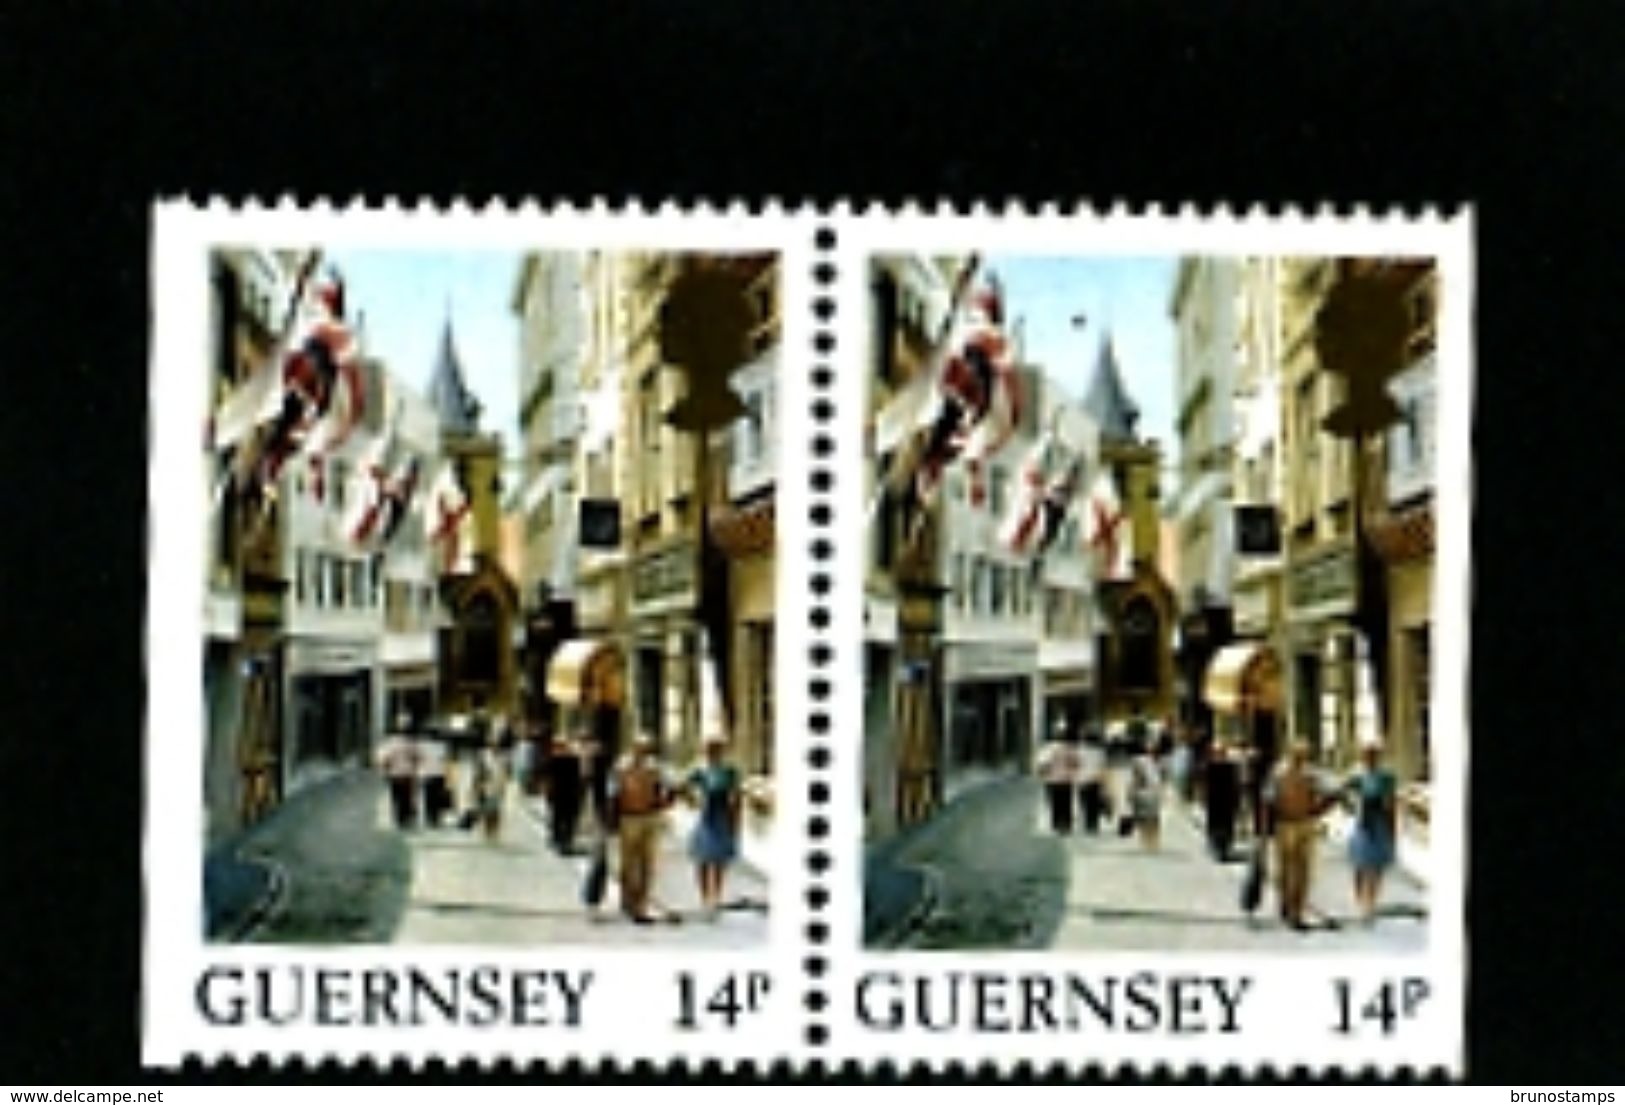 GUERNSEY - 1984  VIEWS  14p  PAIR  EX BOOKLET  IMPERF  SIDES  MINT NH - Guernesey